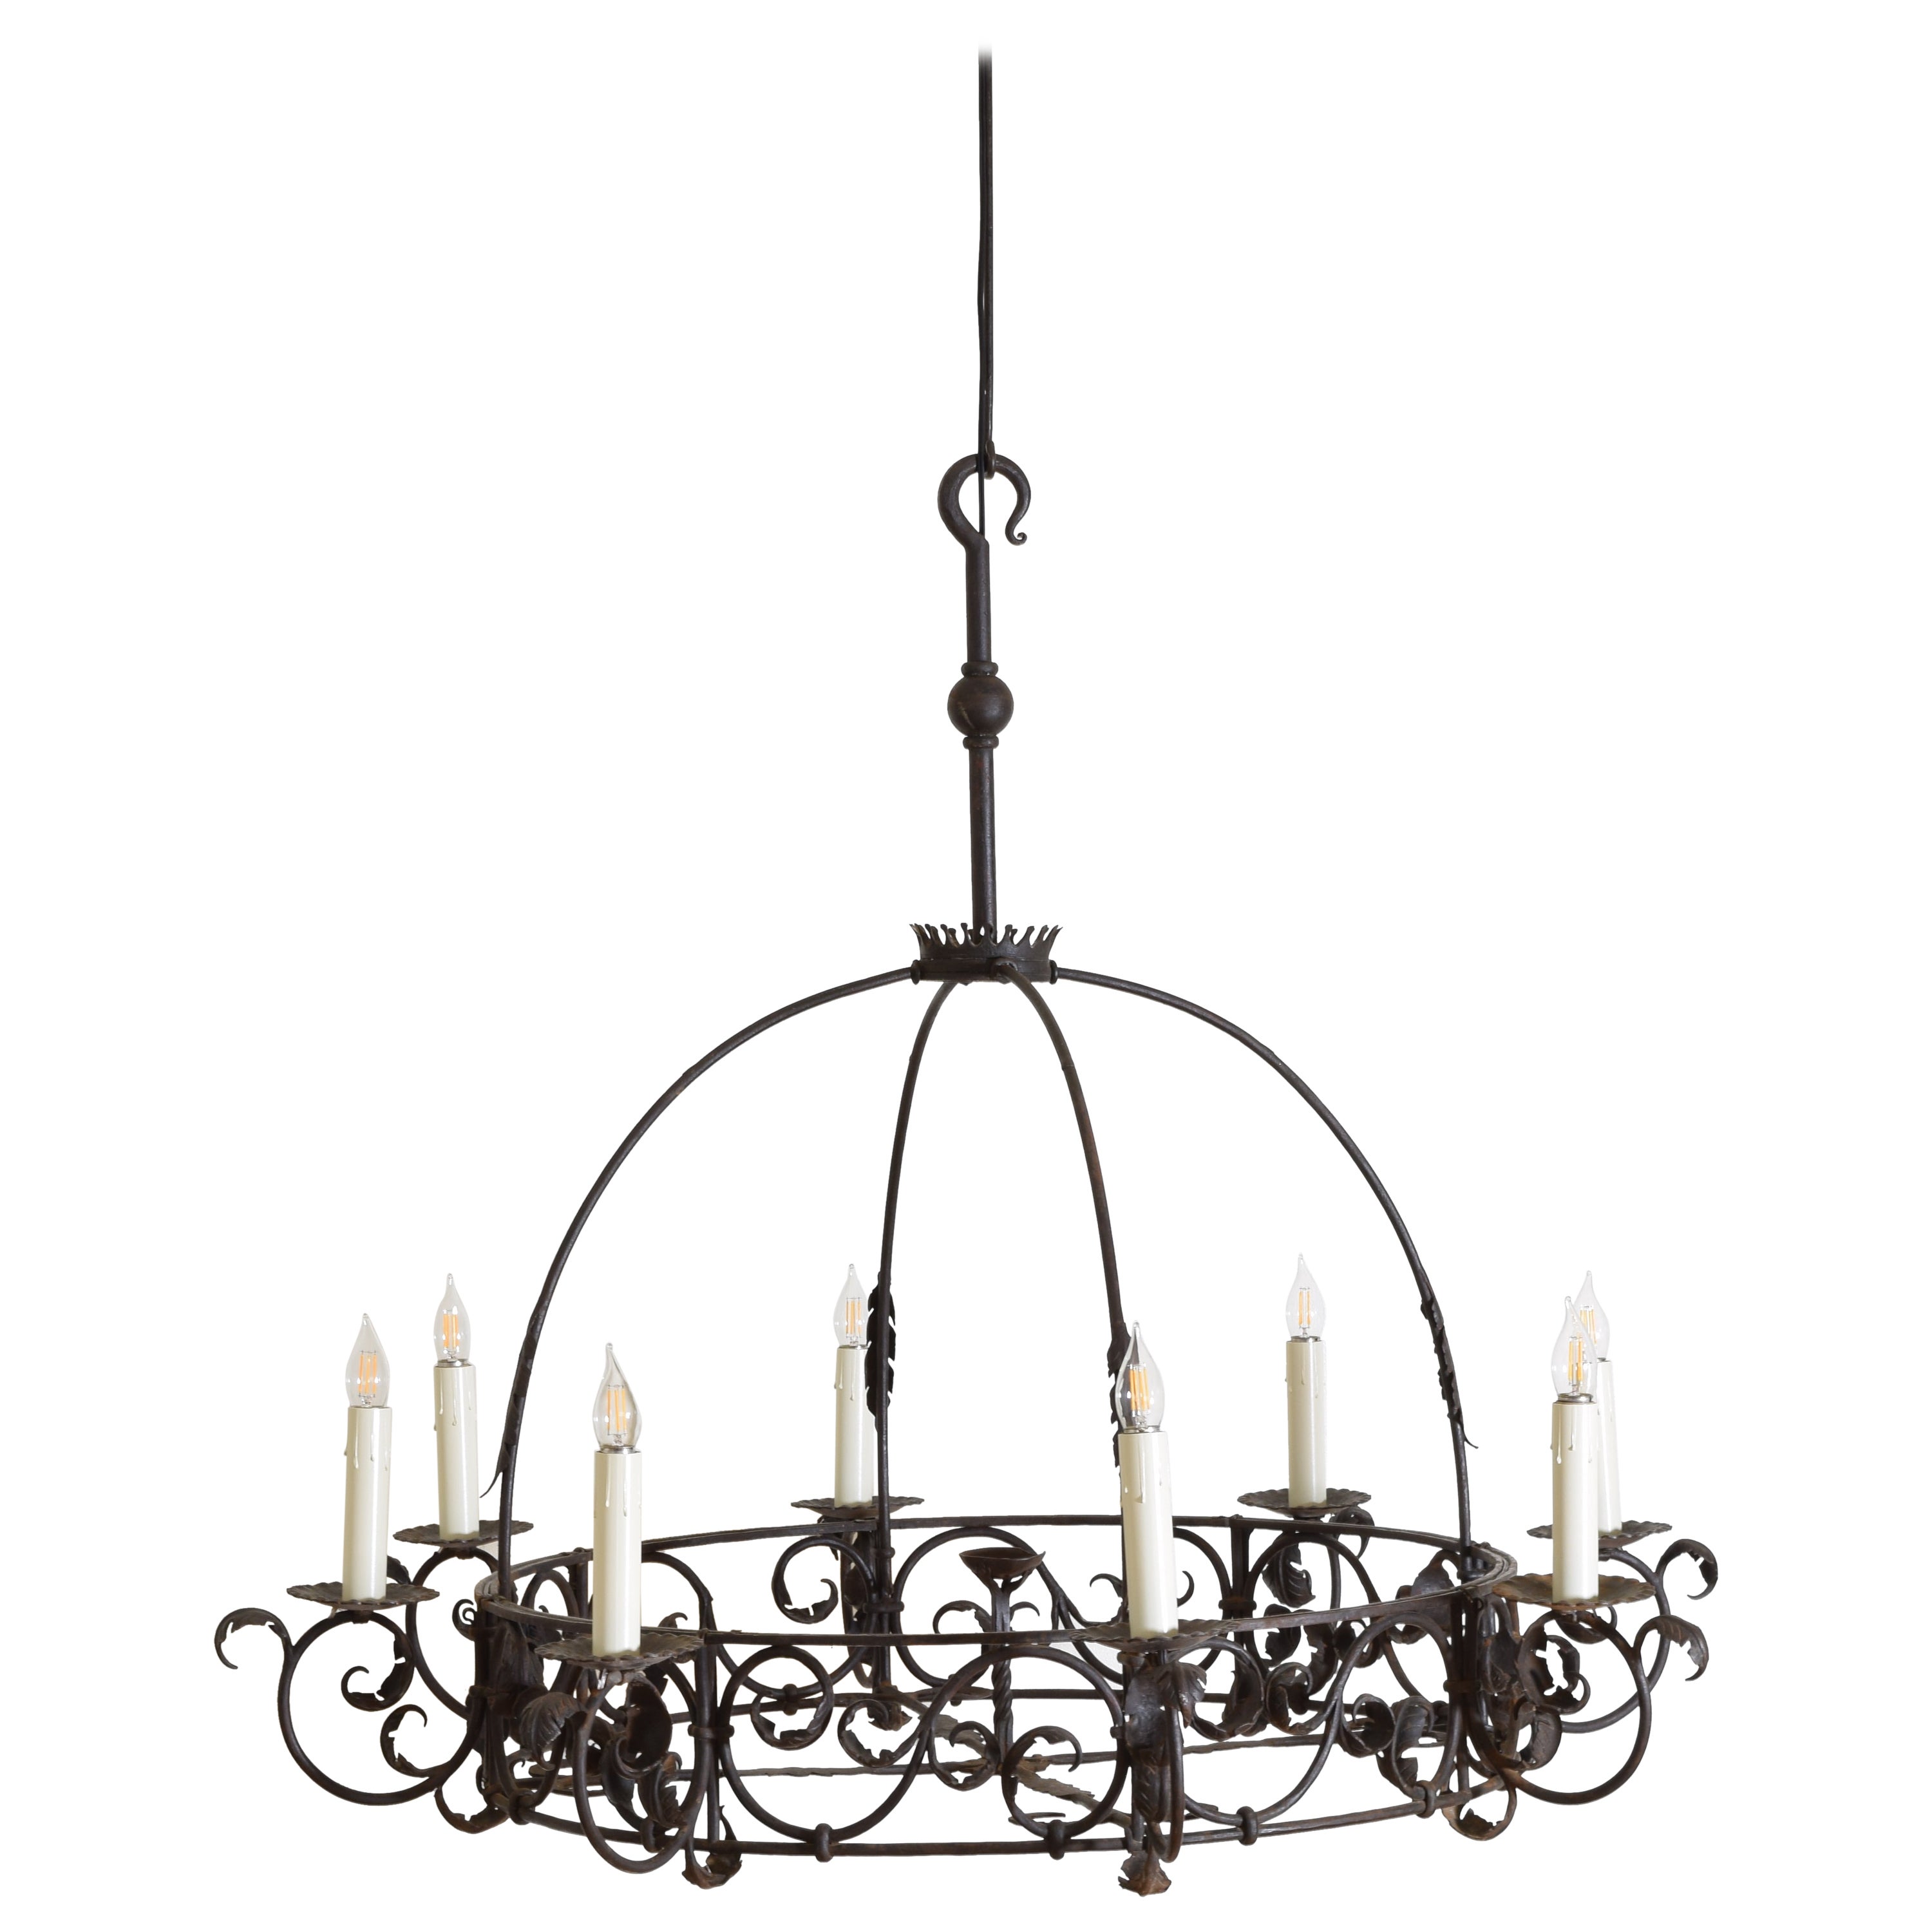 Spanish, Valencia, Wrought Iron 8-Light Dome-Form Chandelier, Early 20th Century For Sale